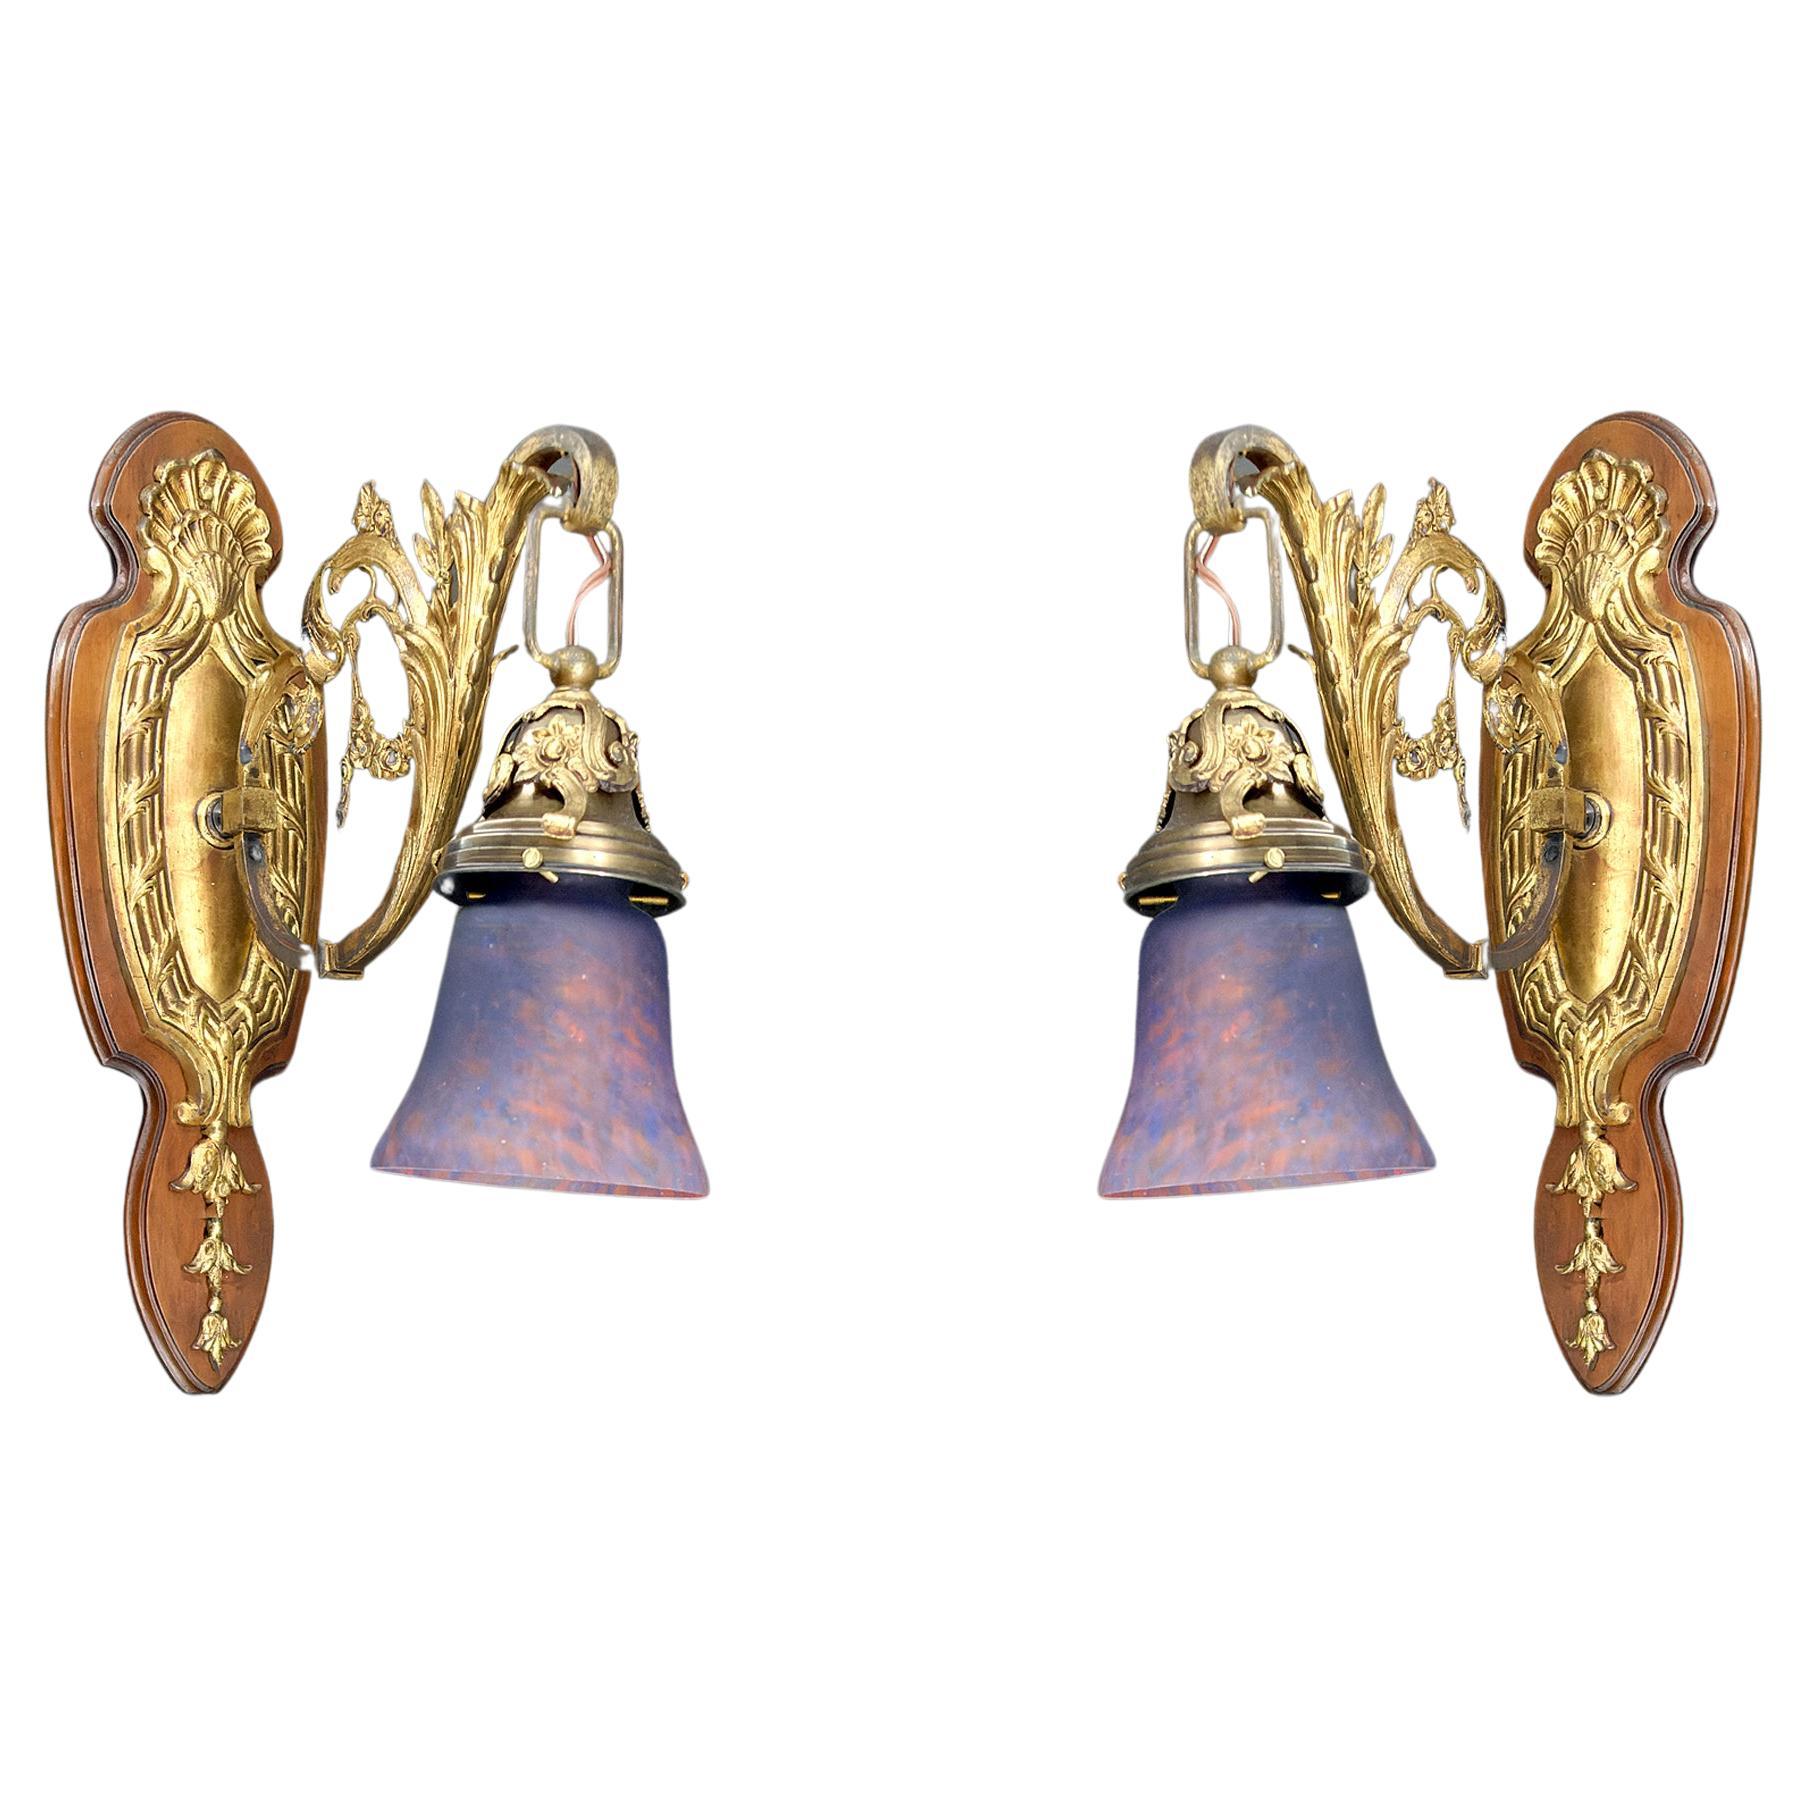 Pair of Rococo / Louis XV wall sconces in gilded bronze, walnut and glass tulips